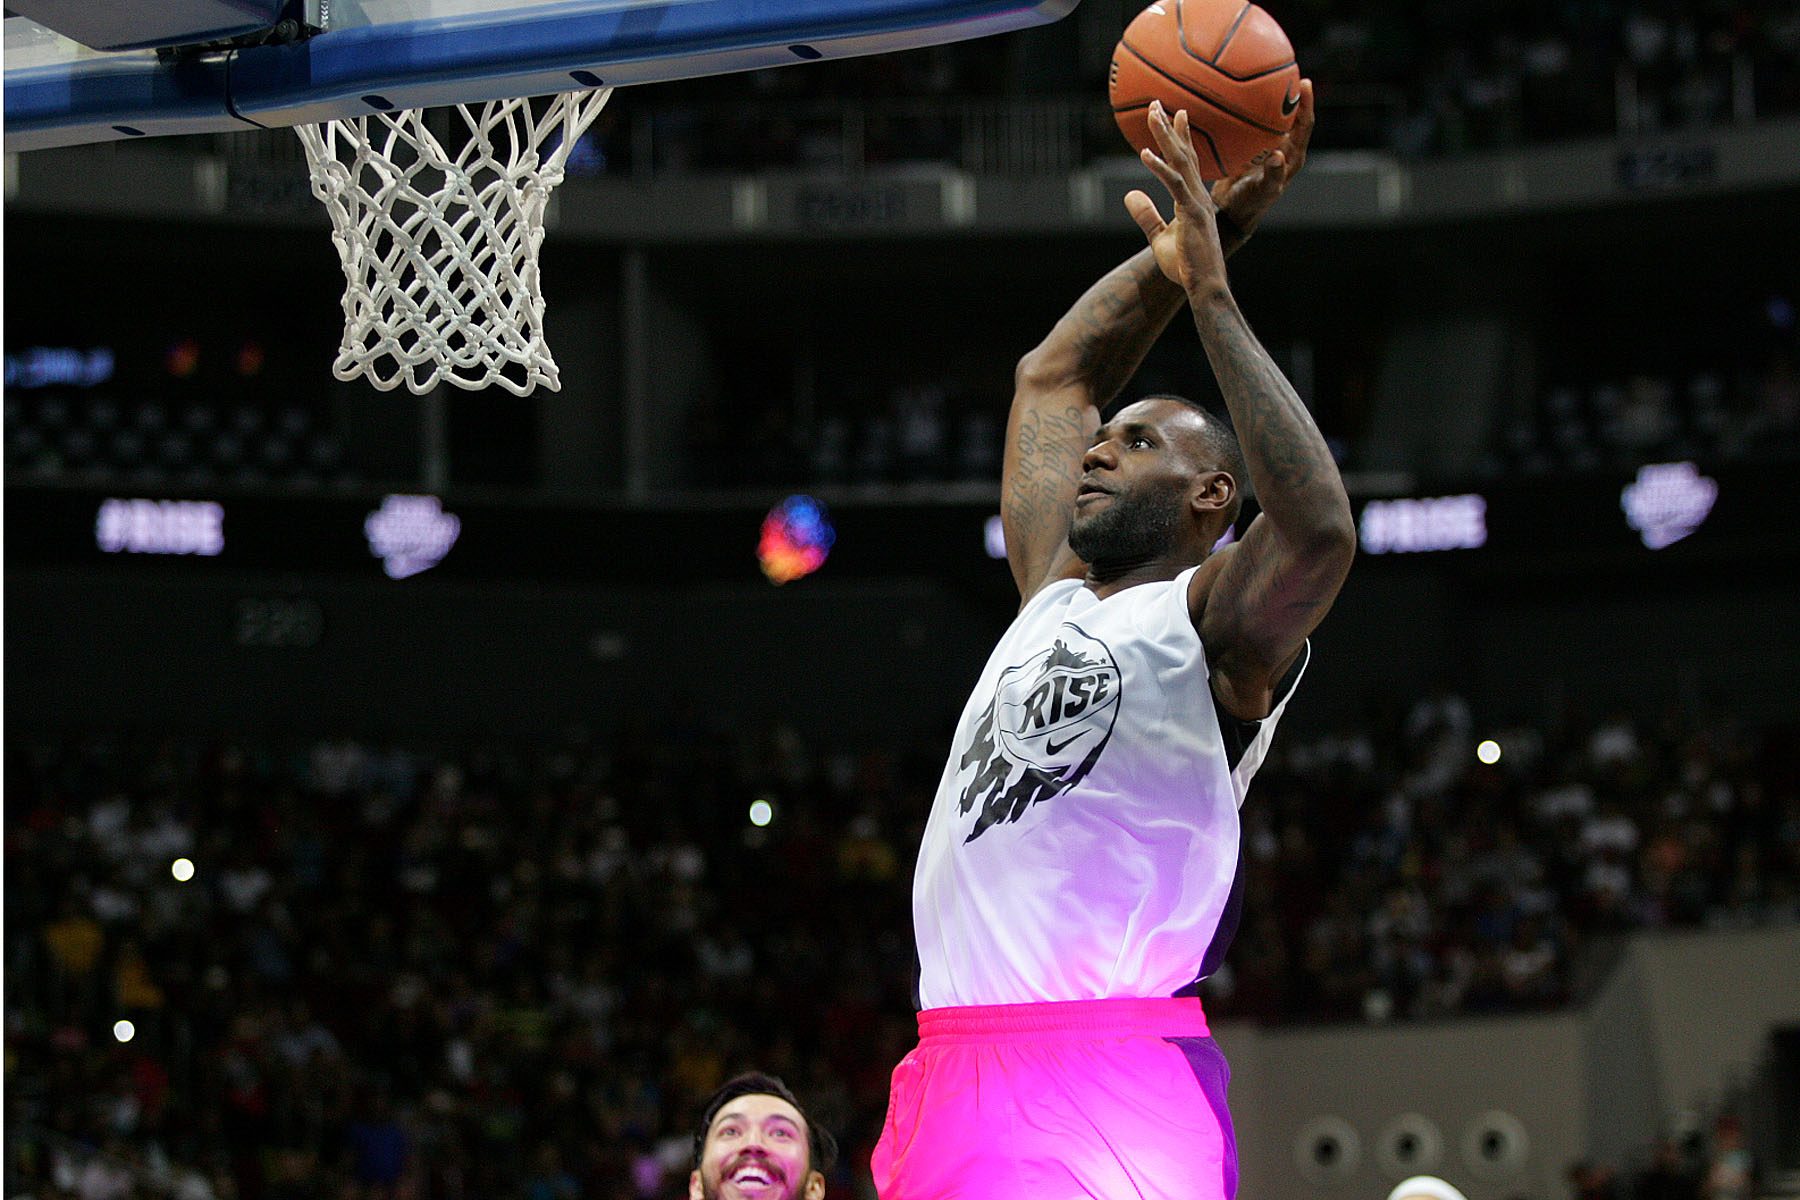 HIGH UP. Once LeBron switched into his jersey, he was quick to go high up for a slam. Photo by Josh Albelda/Rappler 